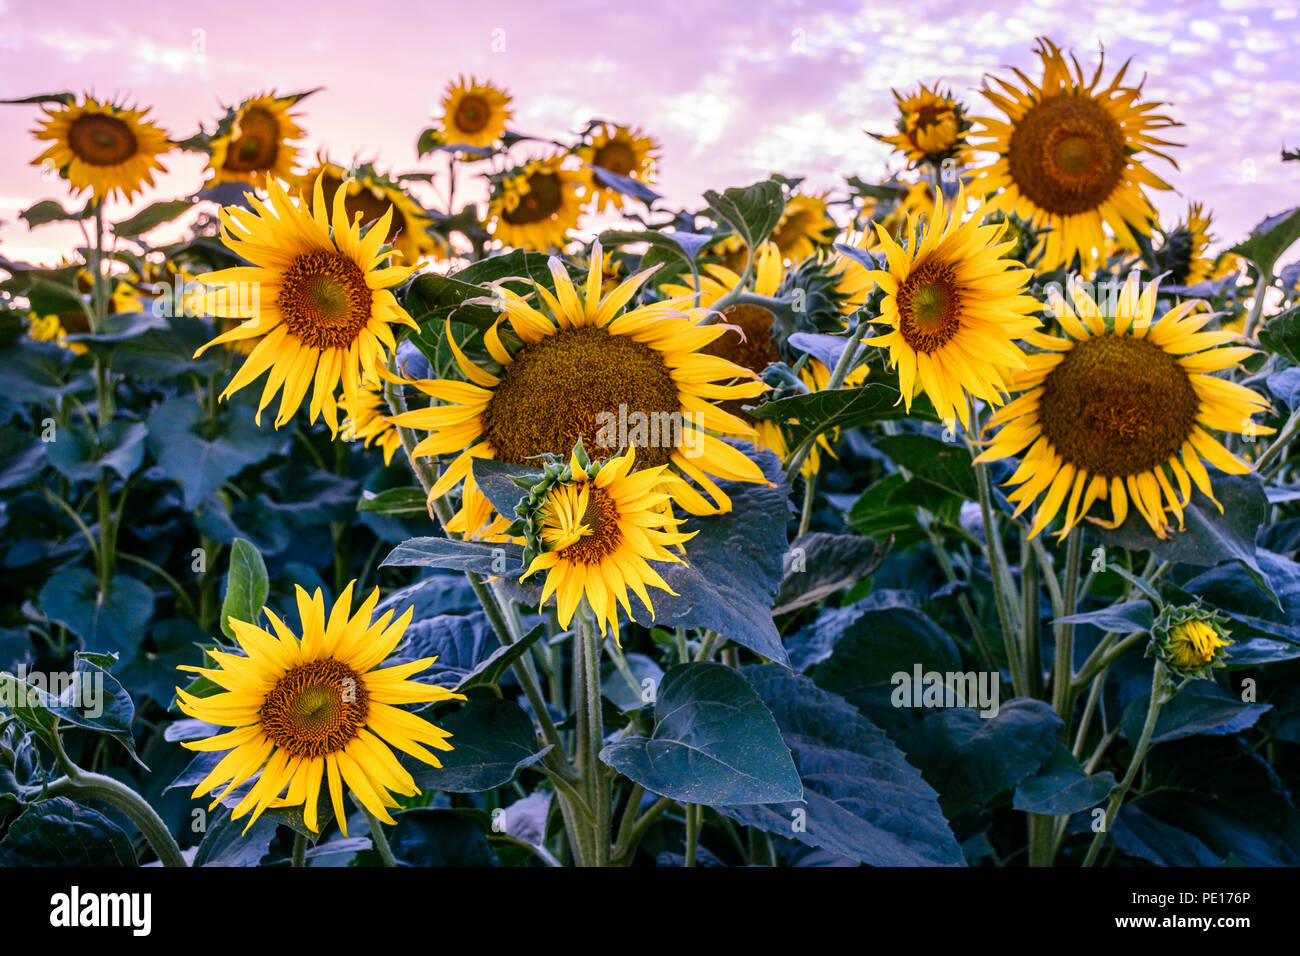 A colorful sunset emerges over sunflowers at various stages in development and blooming outside of Woodland, California. Stock Photo